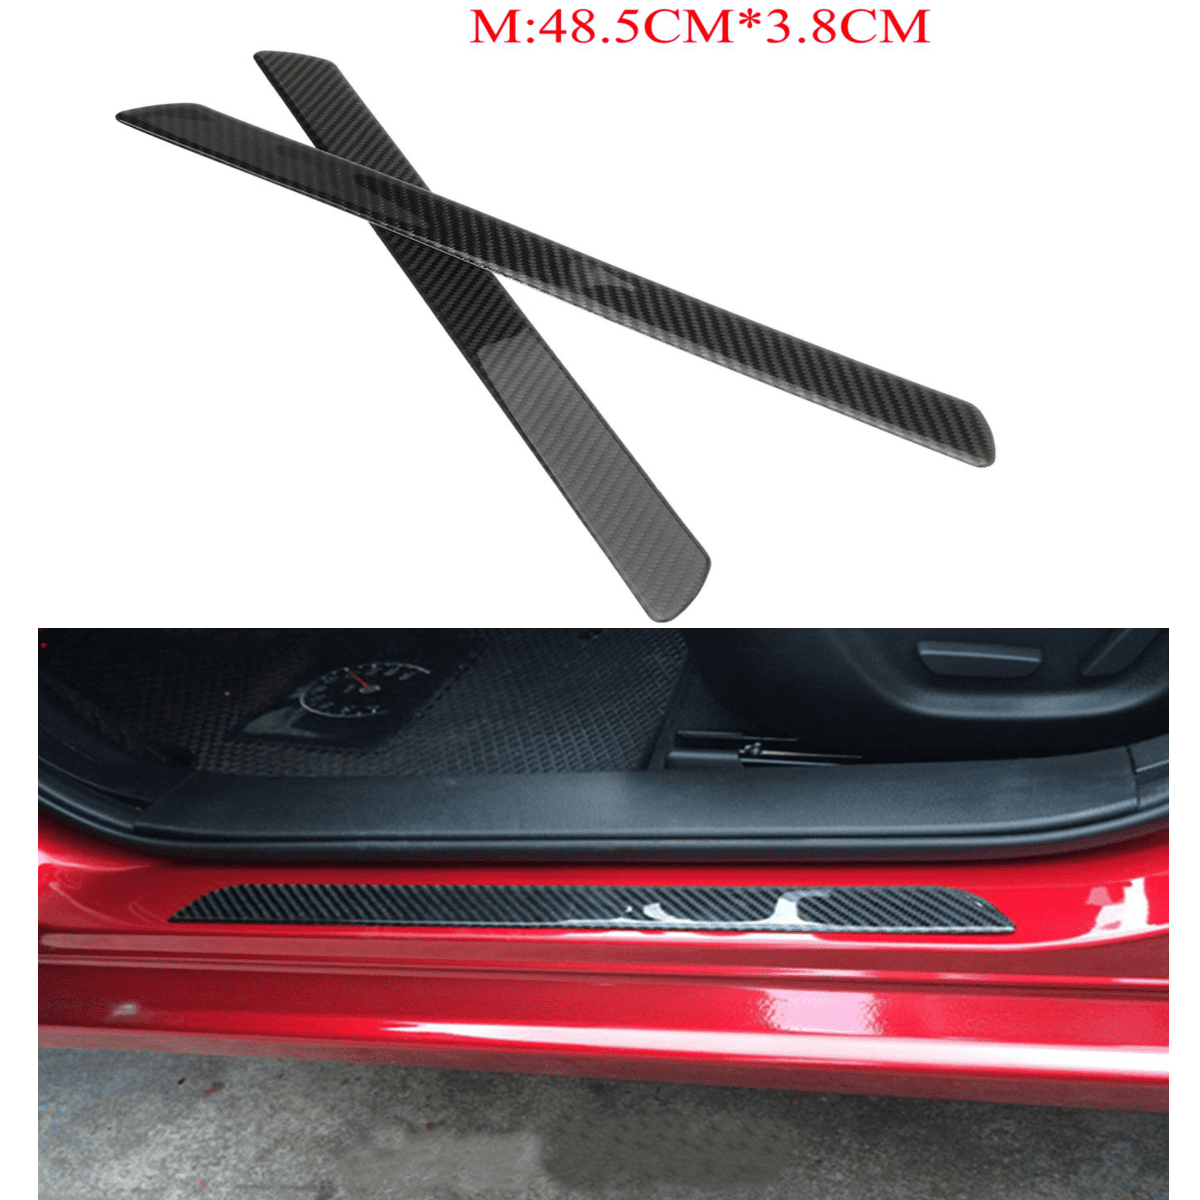 AMYD 4 Pieces/Set Carbon Fiber Door Sill Protection Plate Abrasion Protection Car Styling Auto Accessories For FIAT Tipo Station Wagon White Red